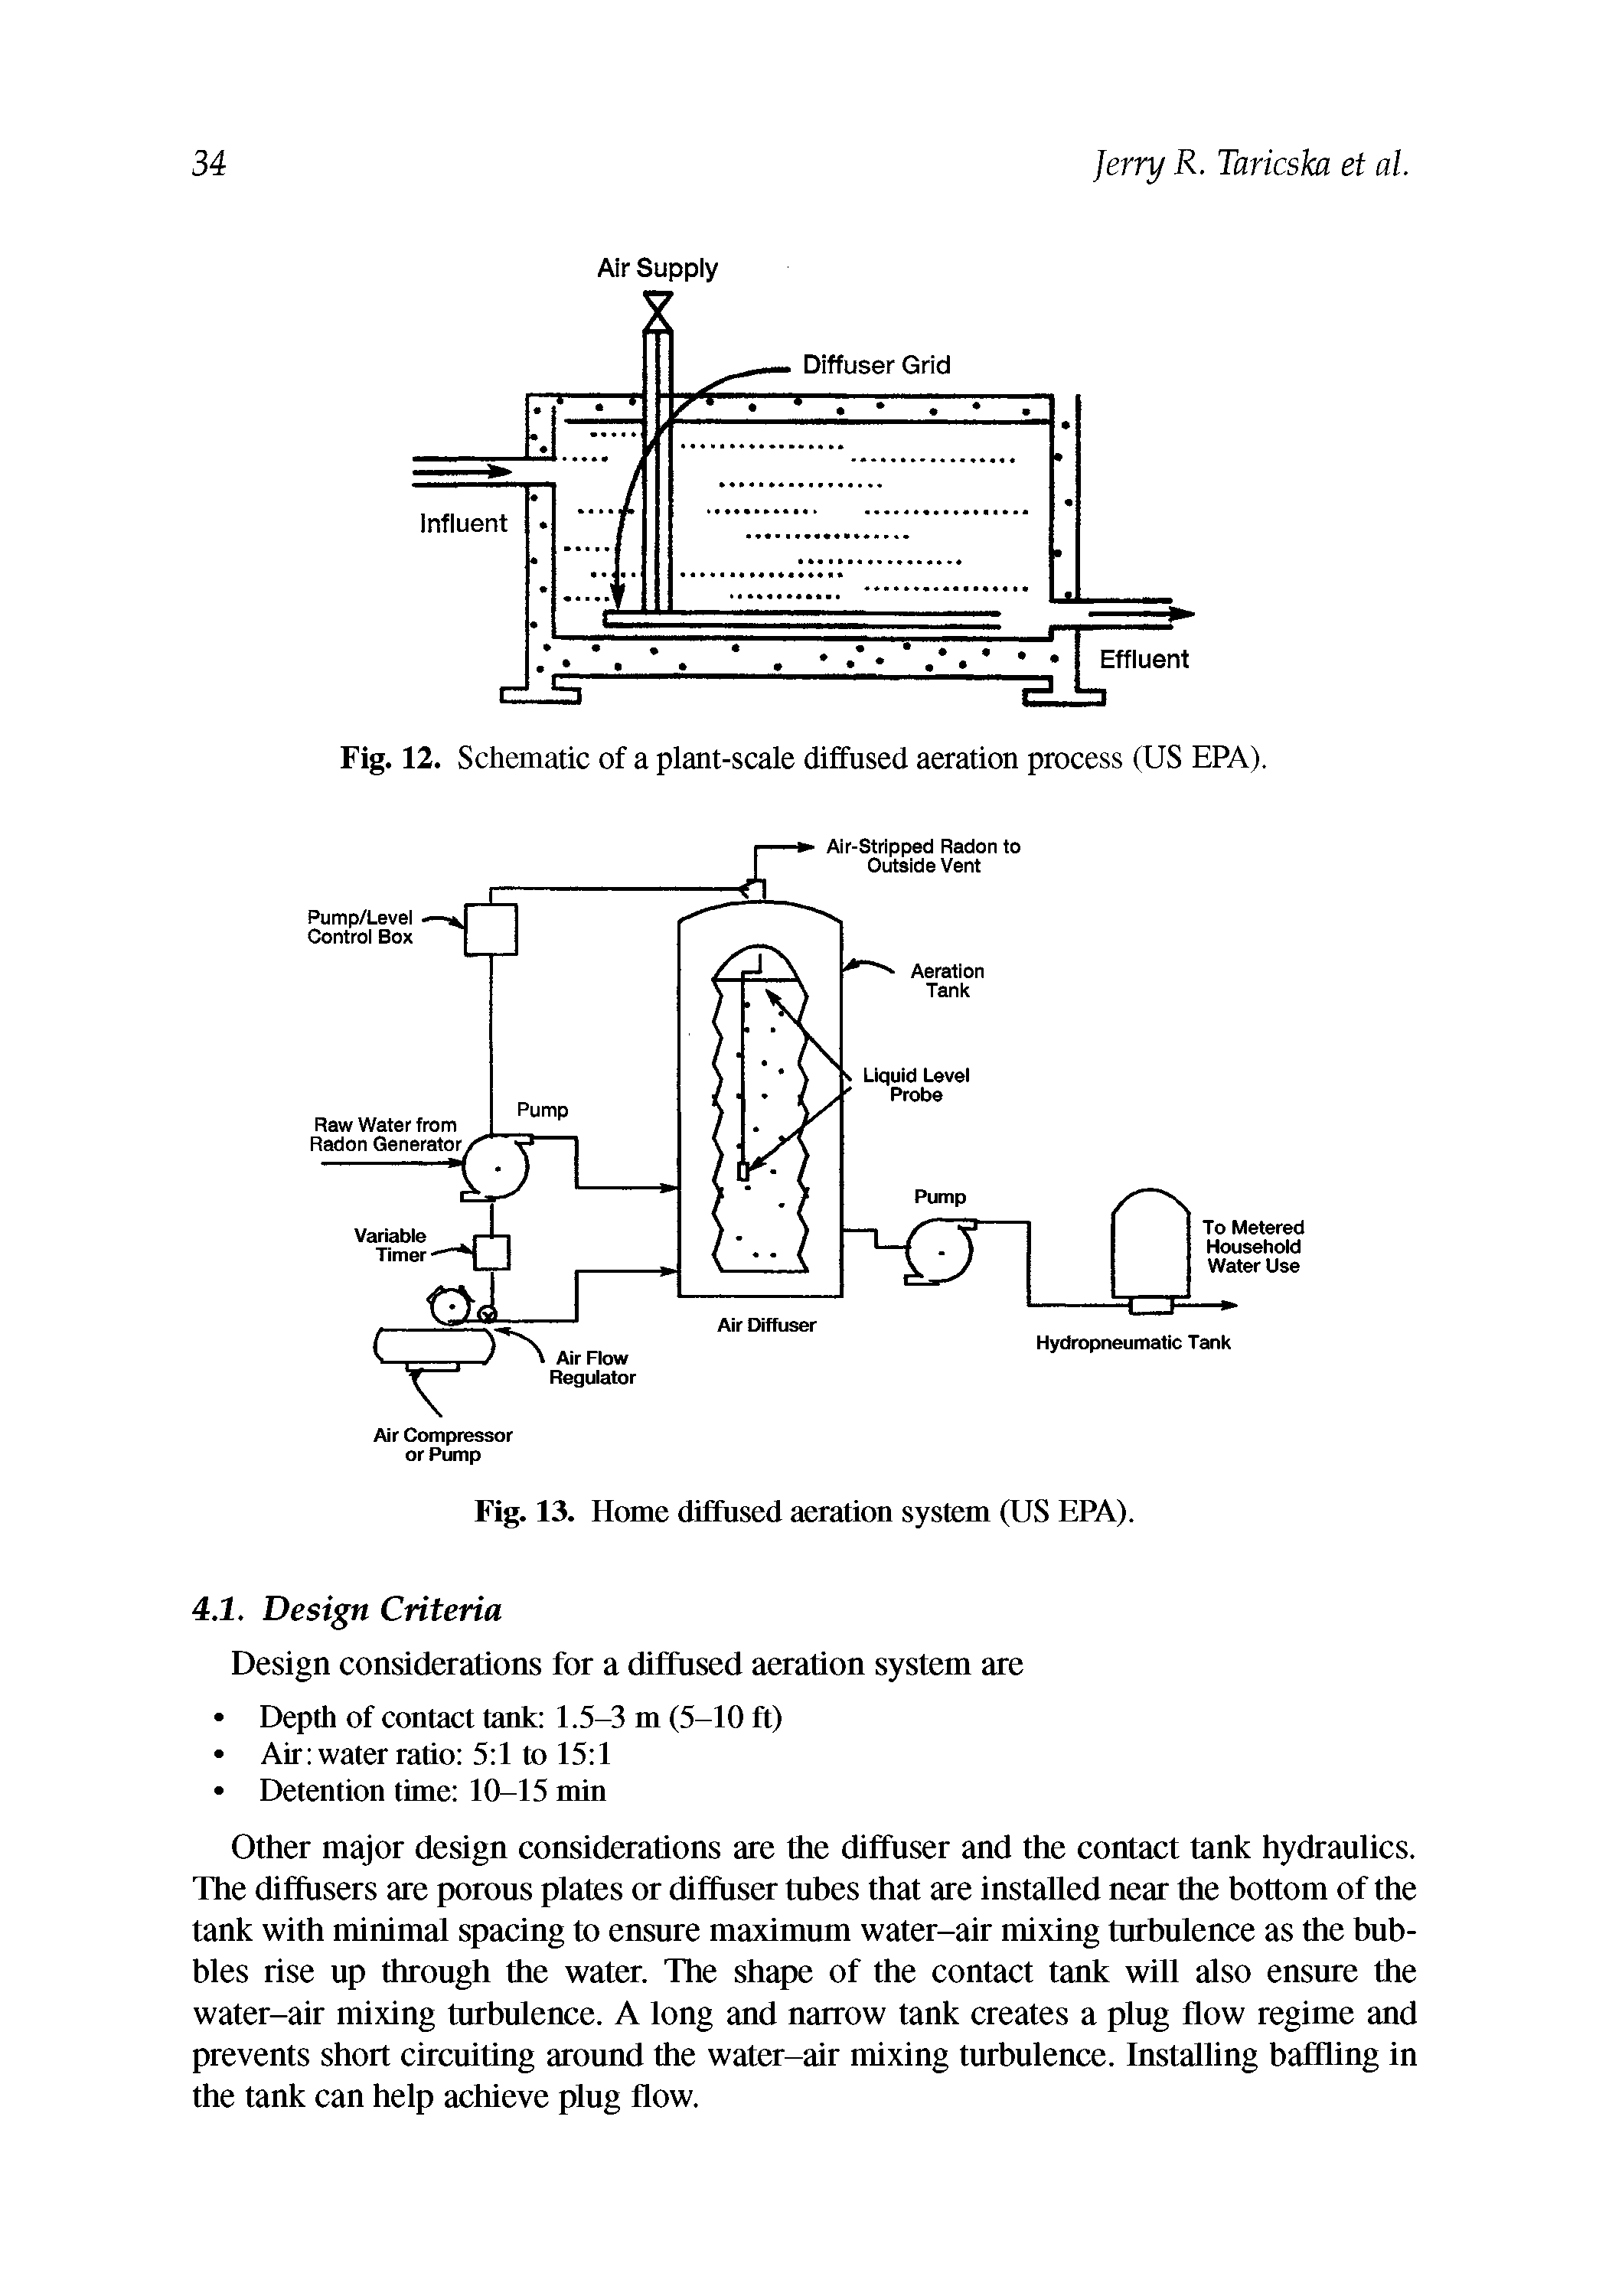 Fig. 12. Schematic of a plant-scale diffused aeration process (US ERA).